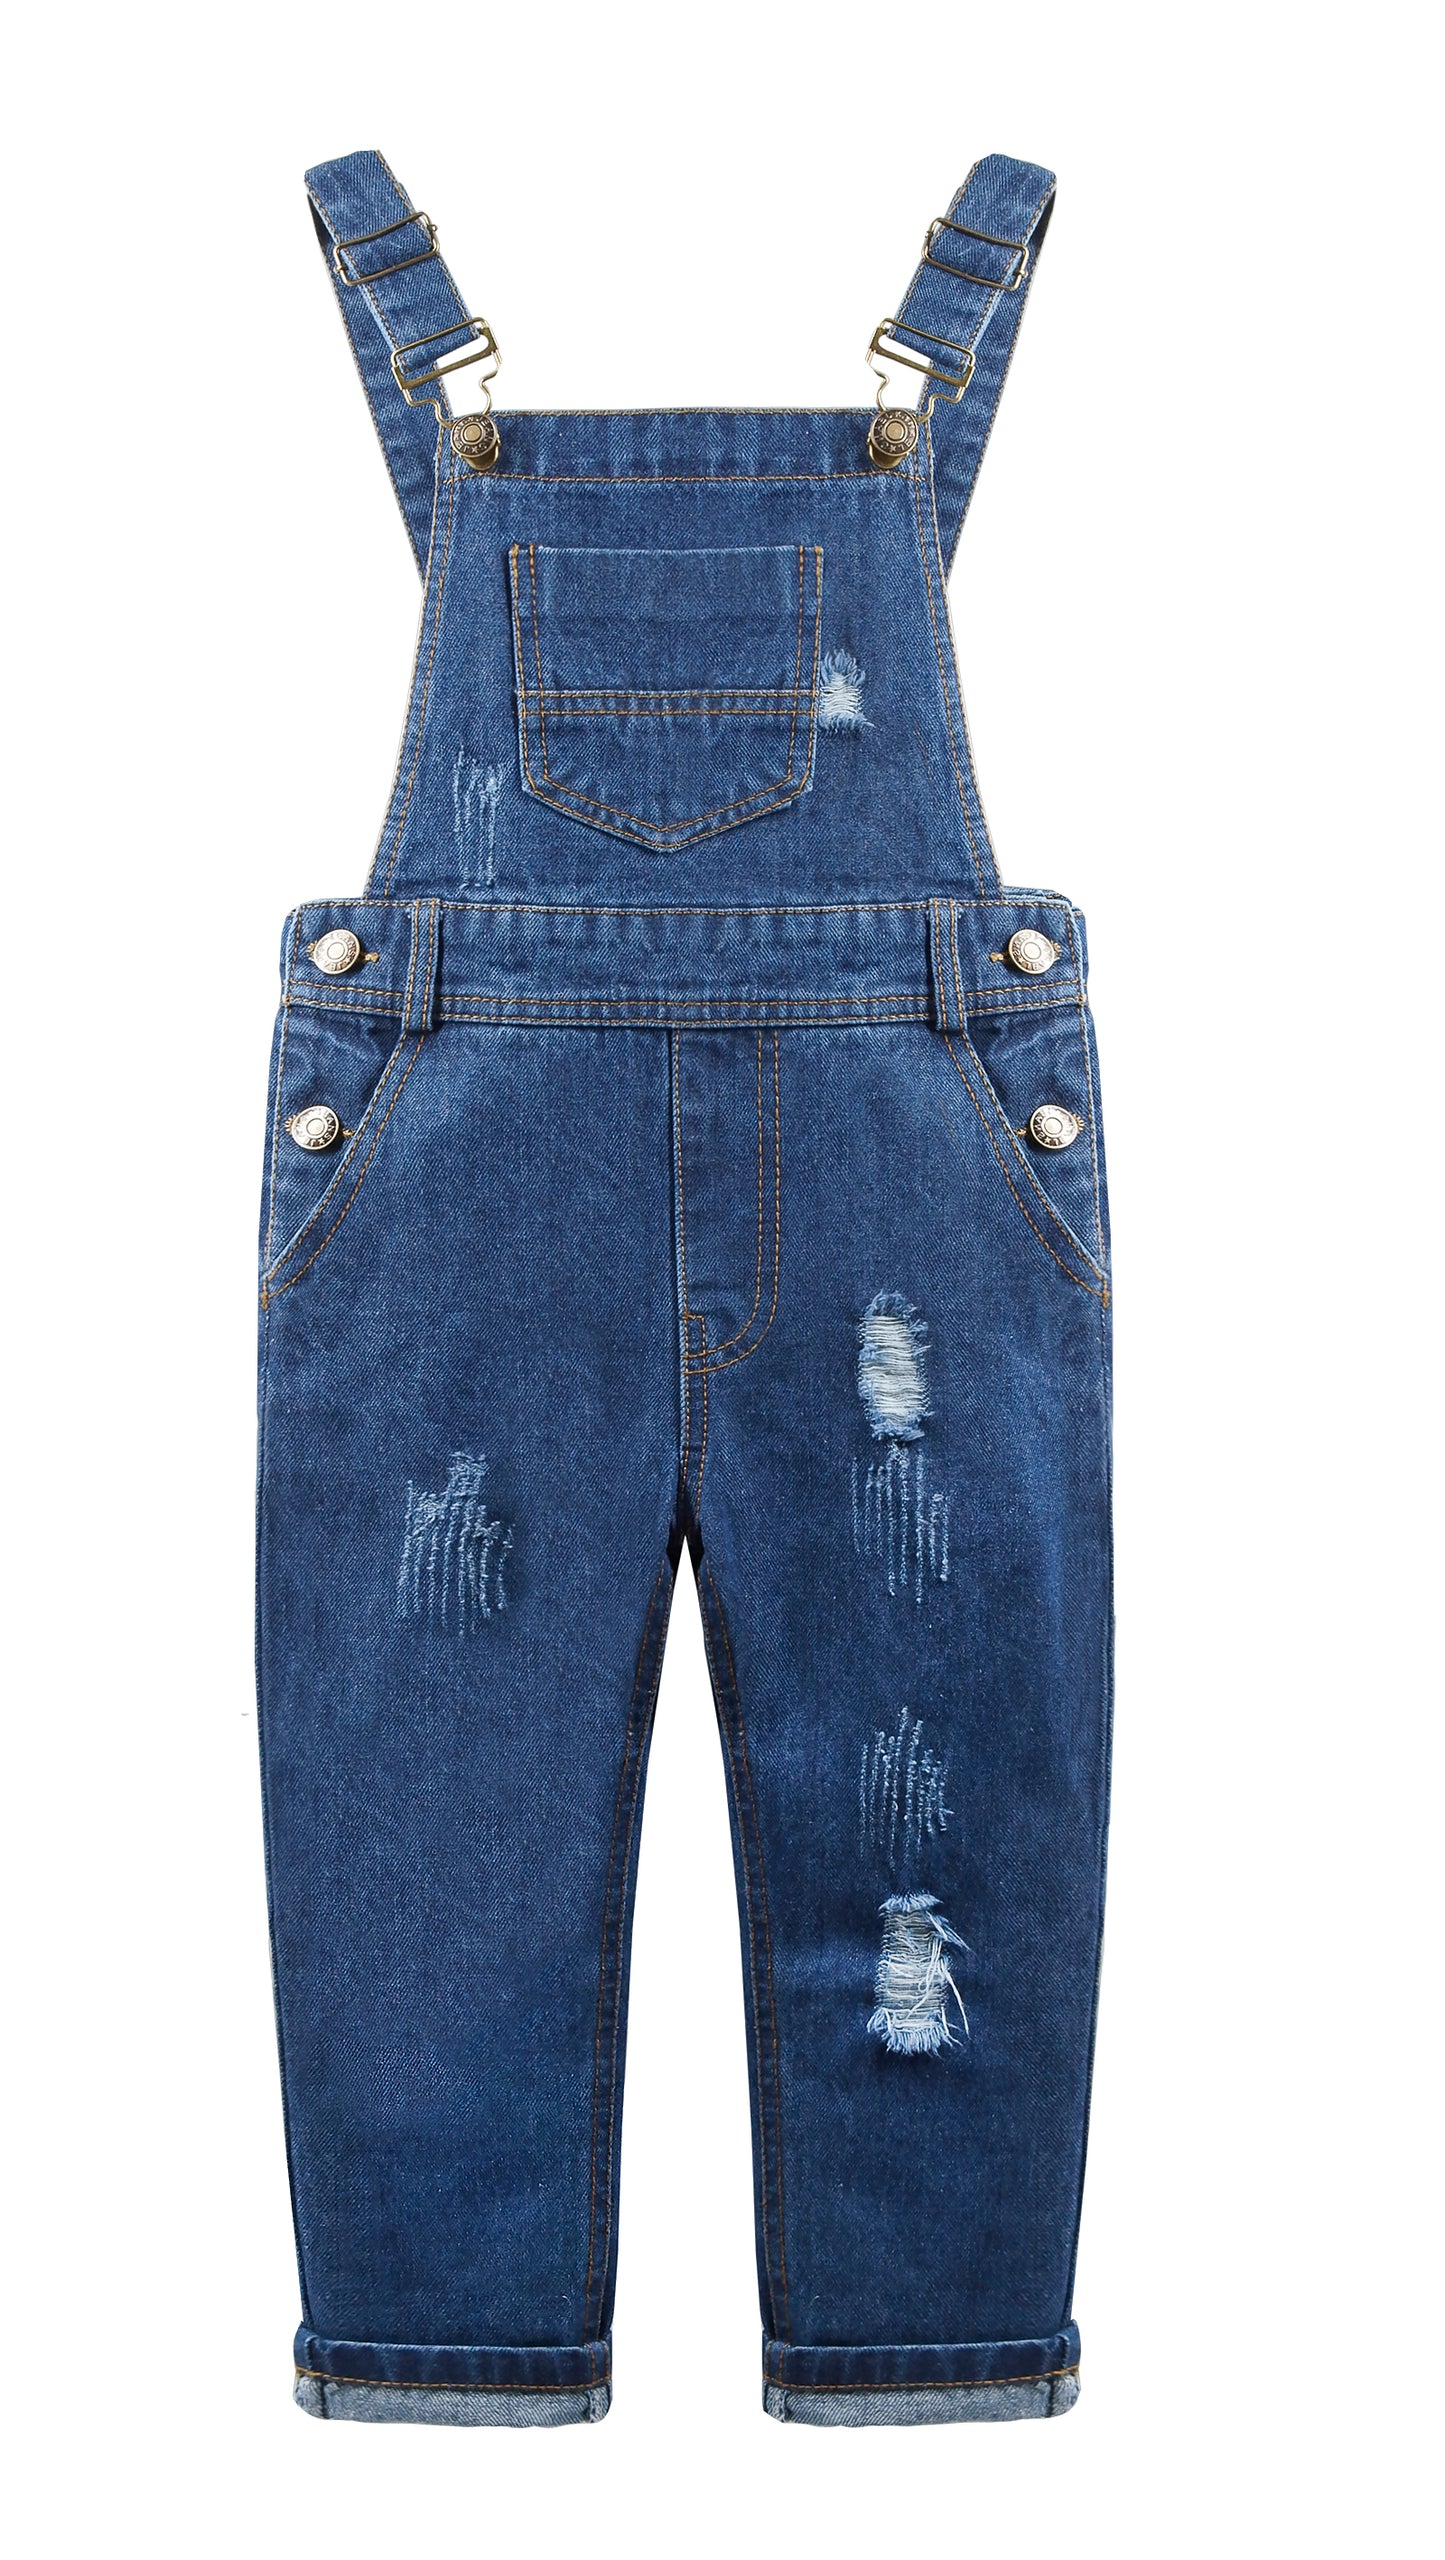 Boys Girls Jeans Overalls Baby Ripped Denim Workwear